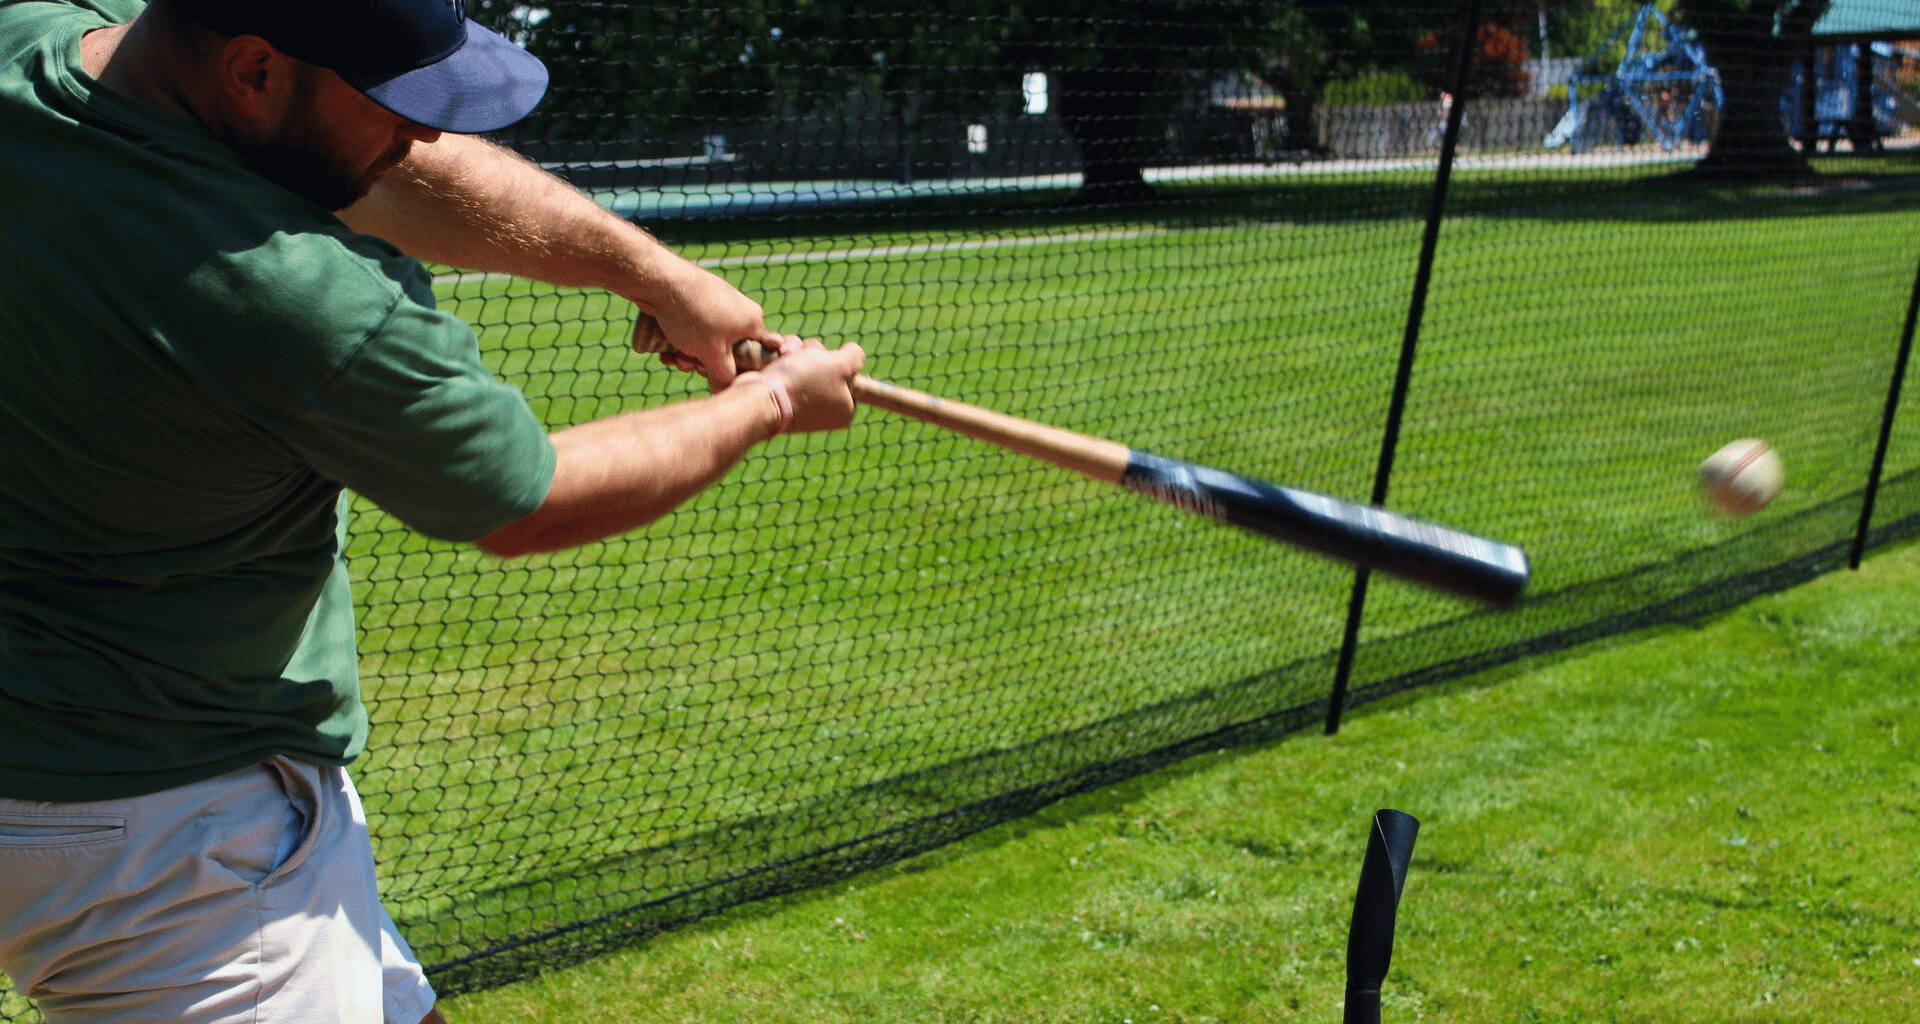 Why Use a Batting Tee for Hitting Training?